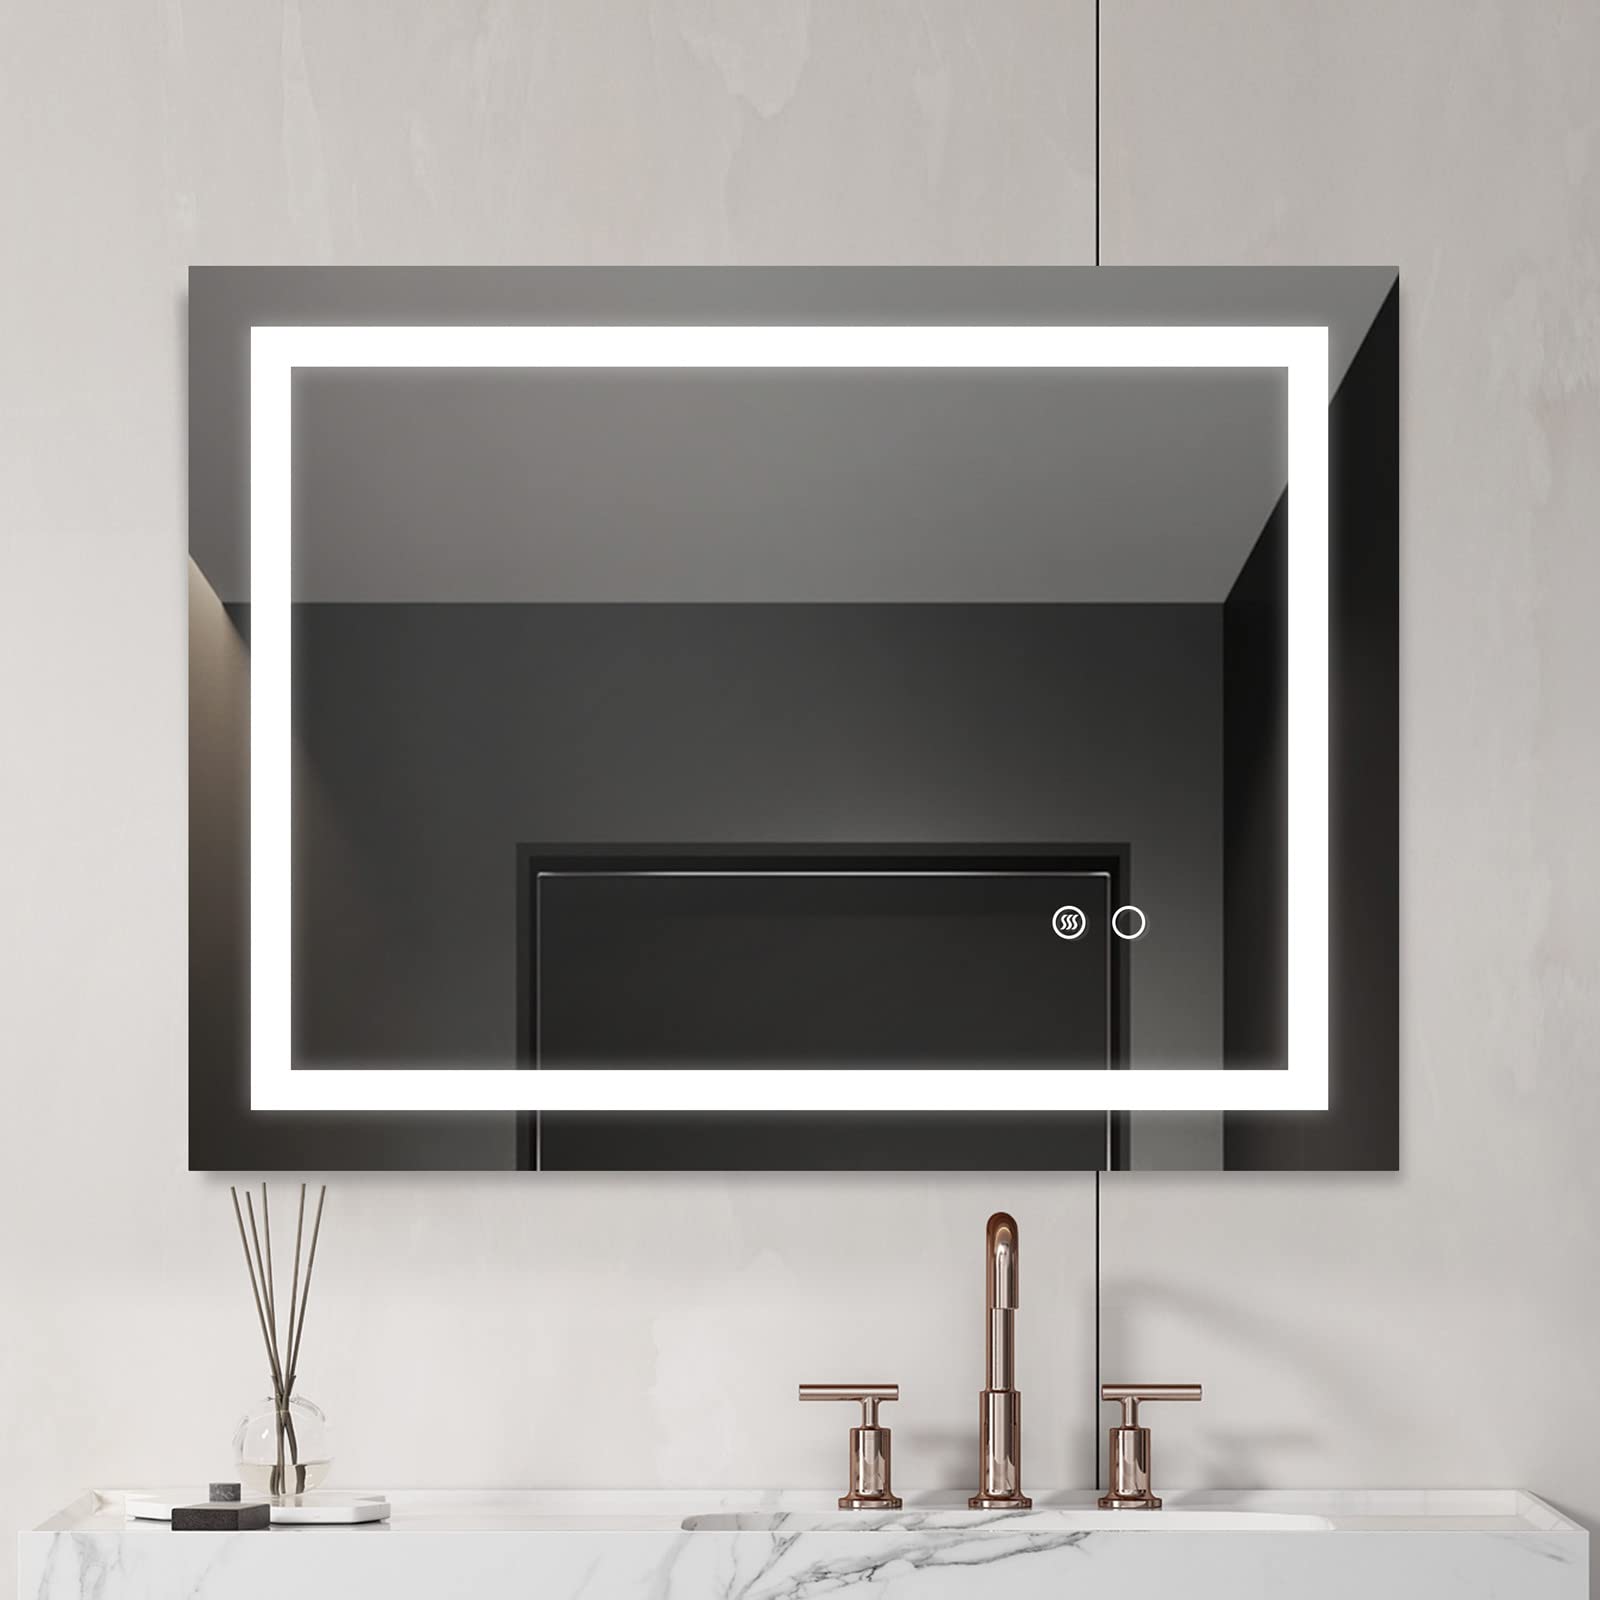 Tesmula 32x24” LED Lighted Bathroom Wall Mounted Mirror with High Lumen Anti-Fog Separately Control Dimmer Function